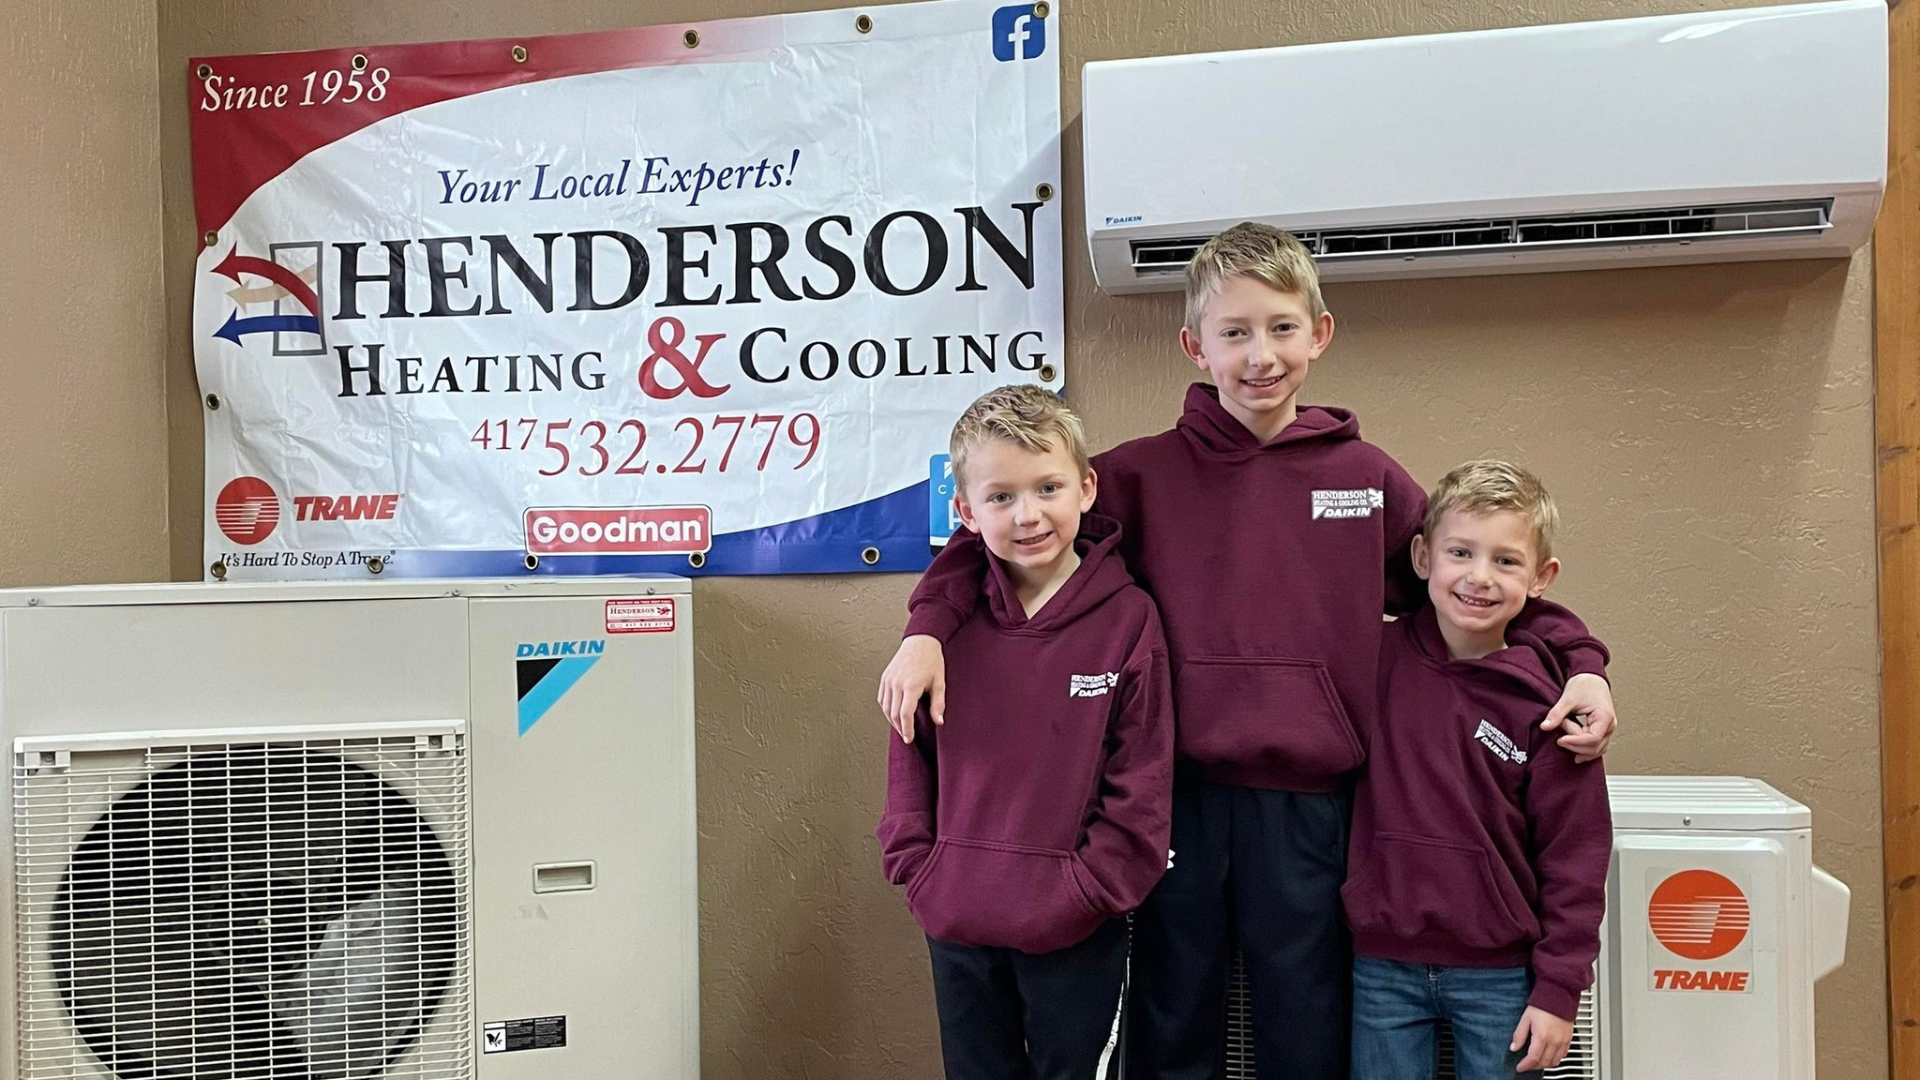 Henderson Heating & Cooling